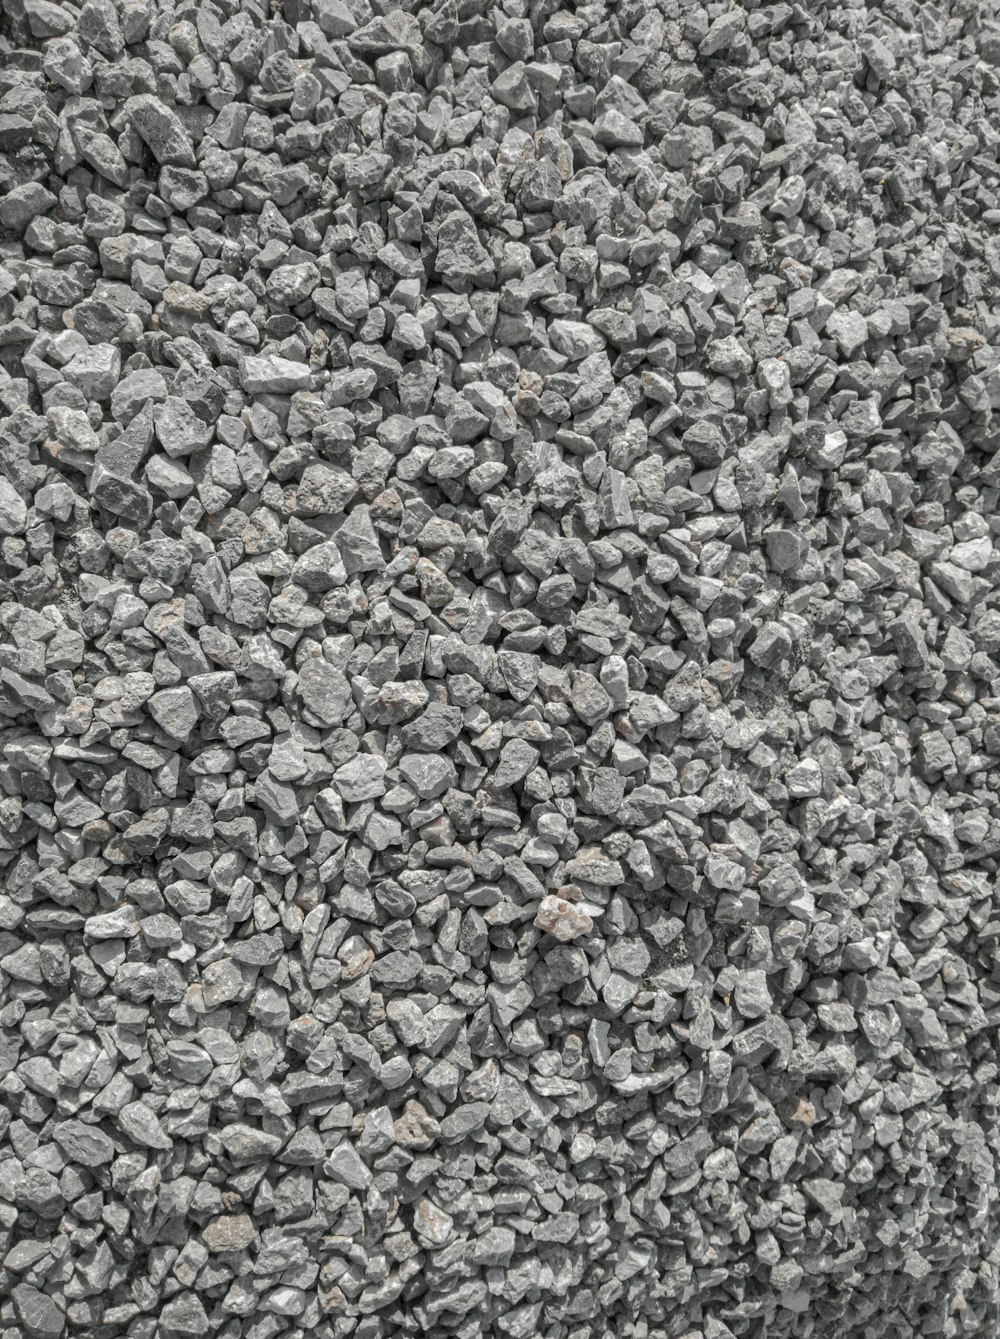 a black and white photo of rocks and gravel